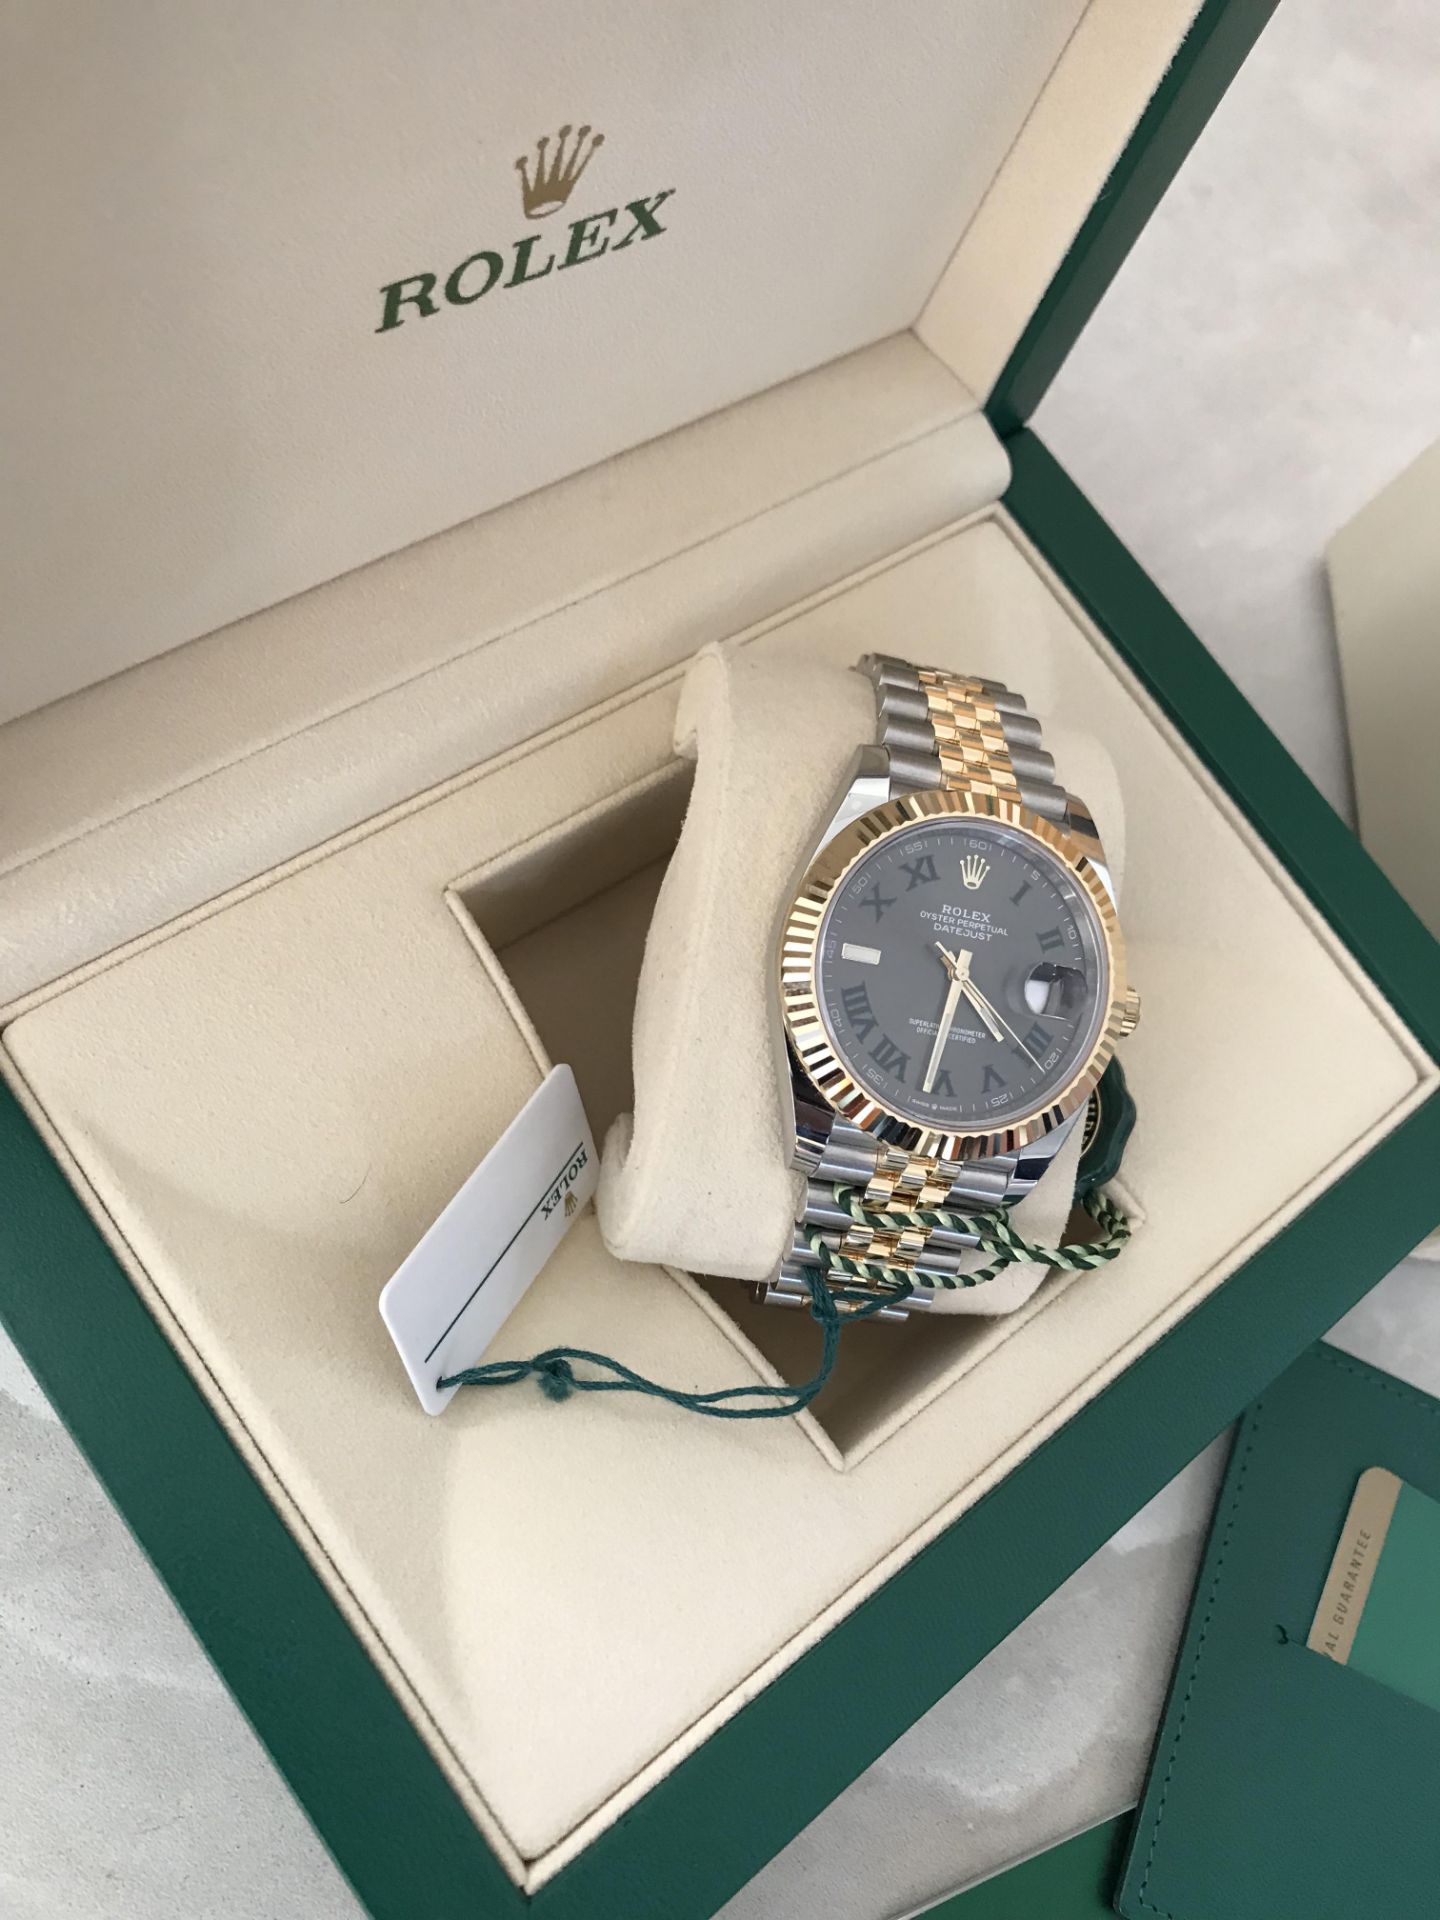 2019 ROLEX GOLD JUBILEE BIMETAL WIMBLEDON DATE JUST 41 OYSTER 41 MM OYSTERSTEEL AND YELLOW GOLD - Image 3 of 12